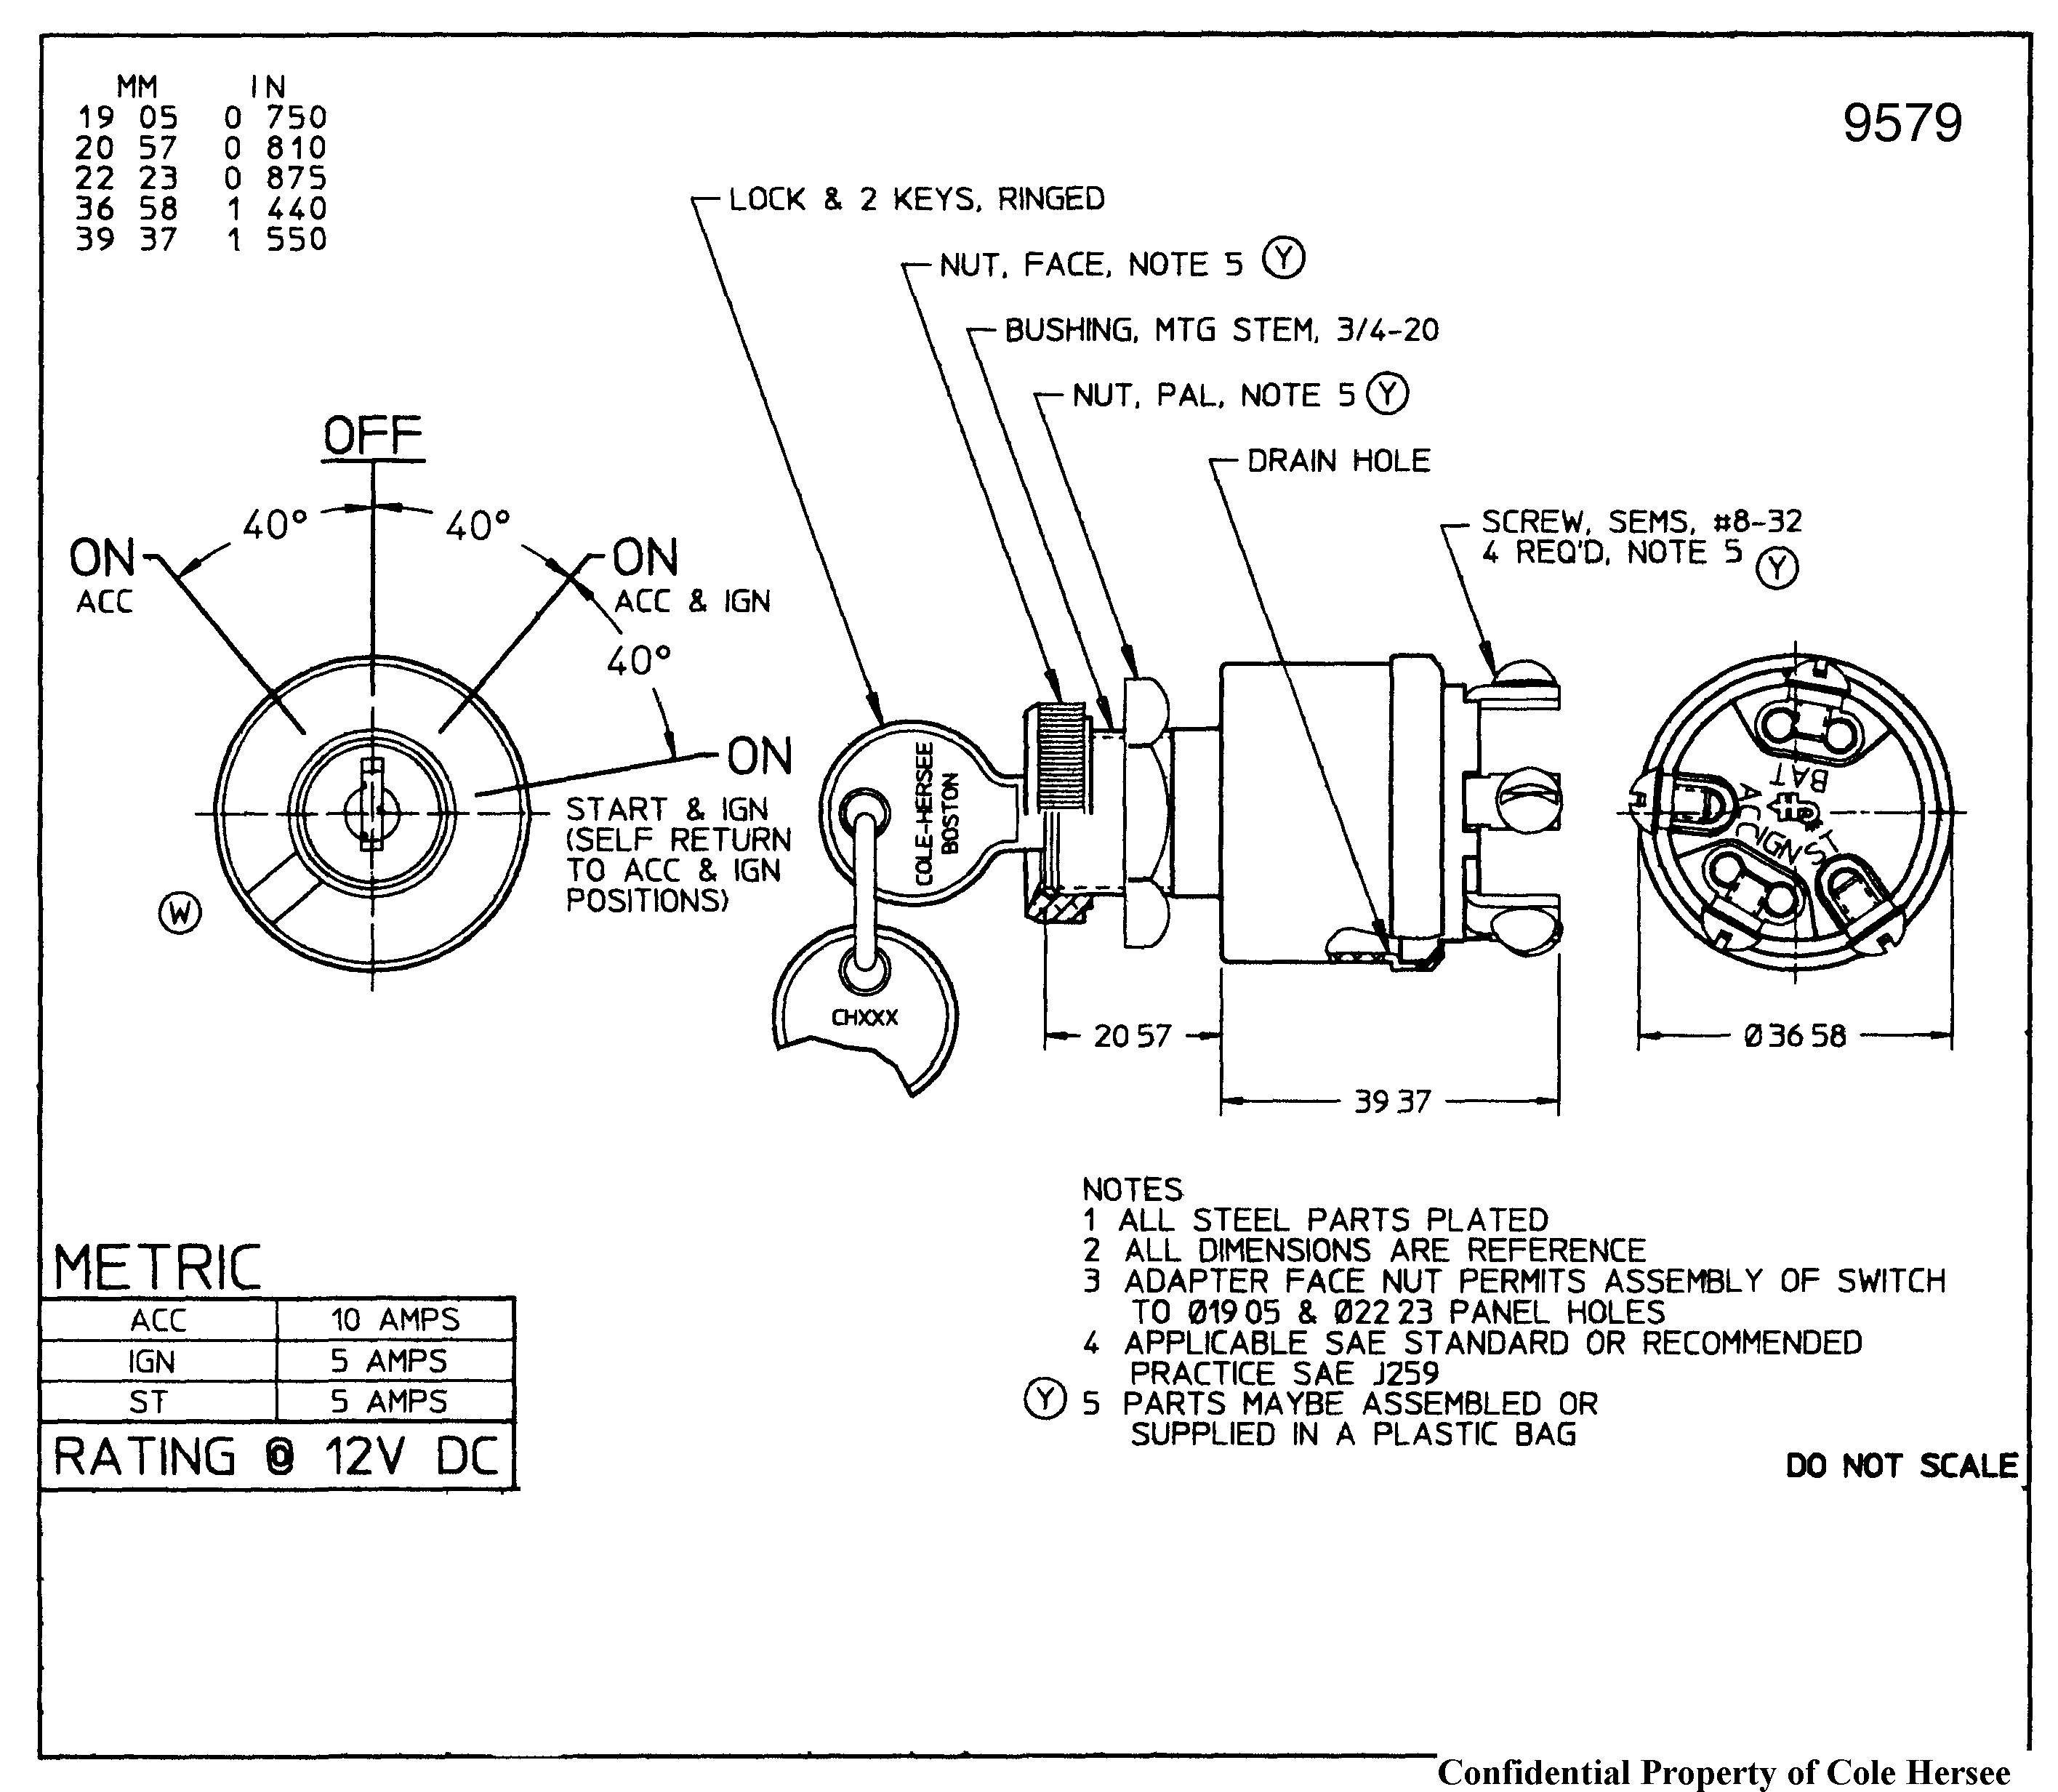 Wiring Diagram for Universal Ignition Switch Best Universal Ignition Switch Wiring Diagram Jerrysmasterkeyforyouand